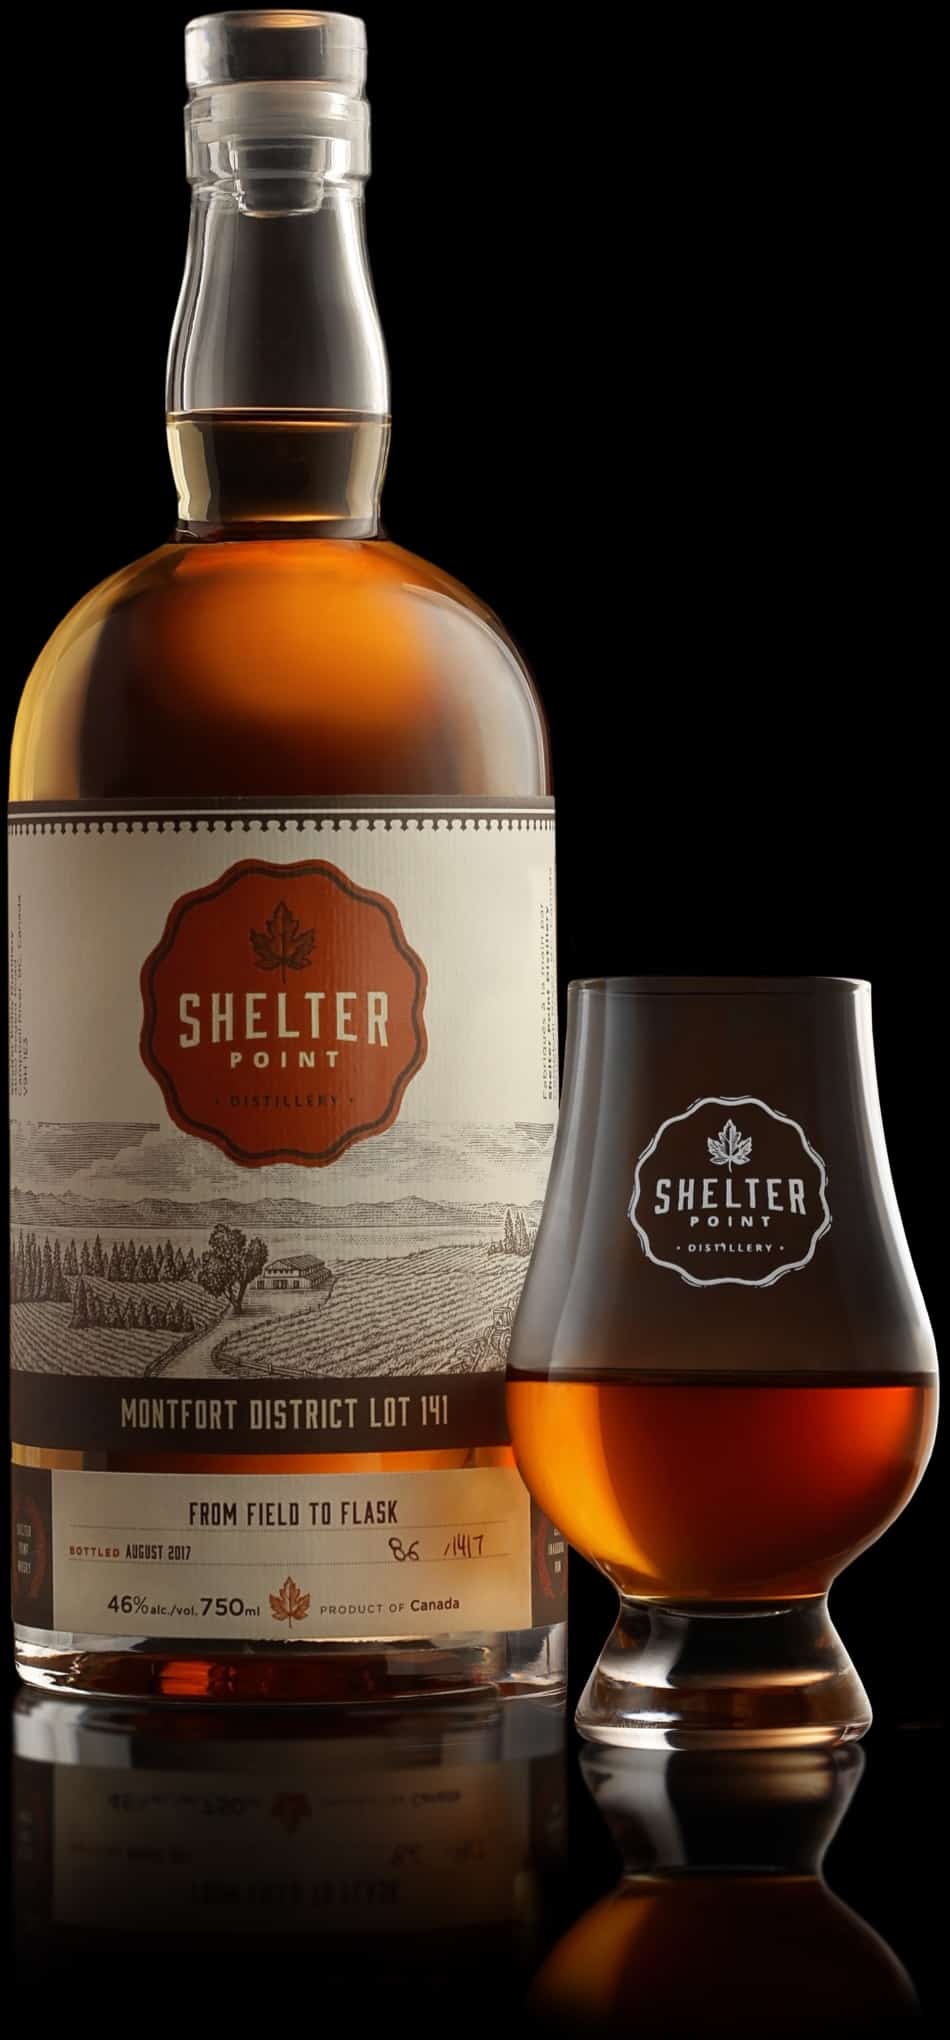 Image courtesy of Shelter Point Distillery.